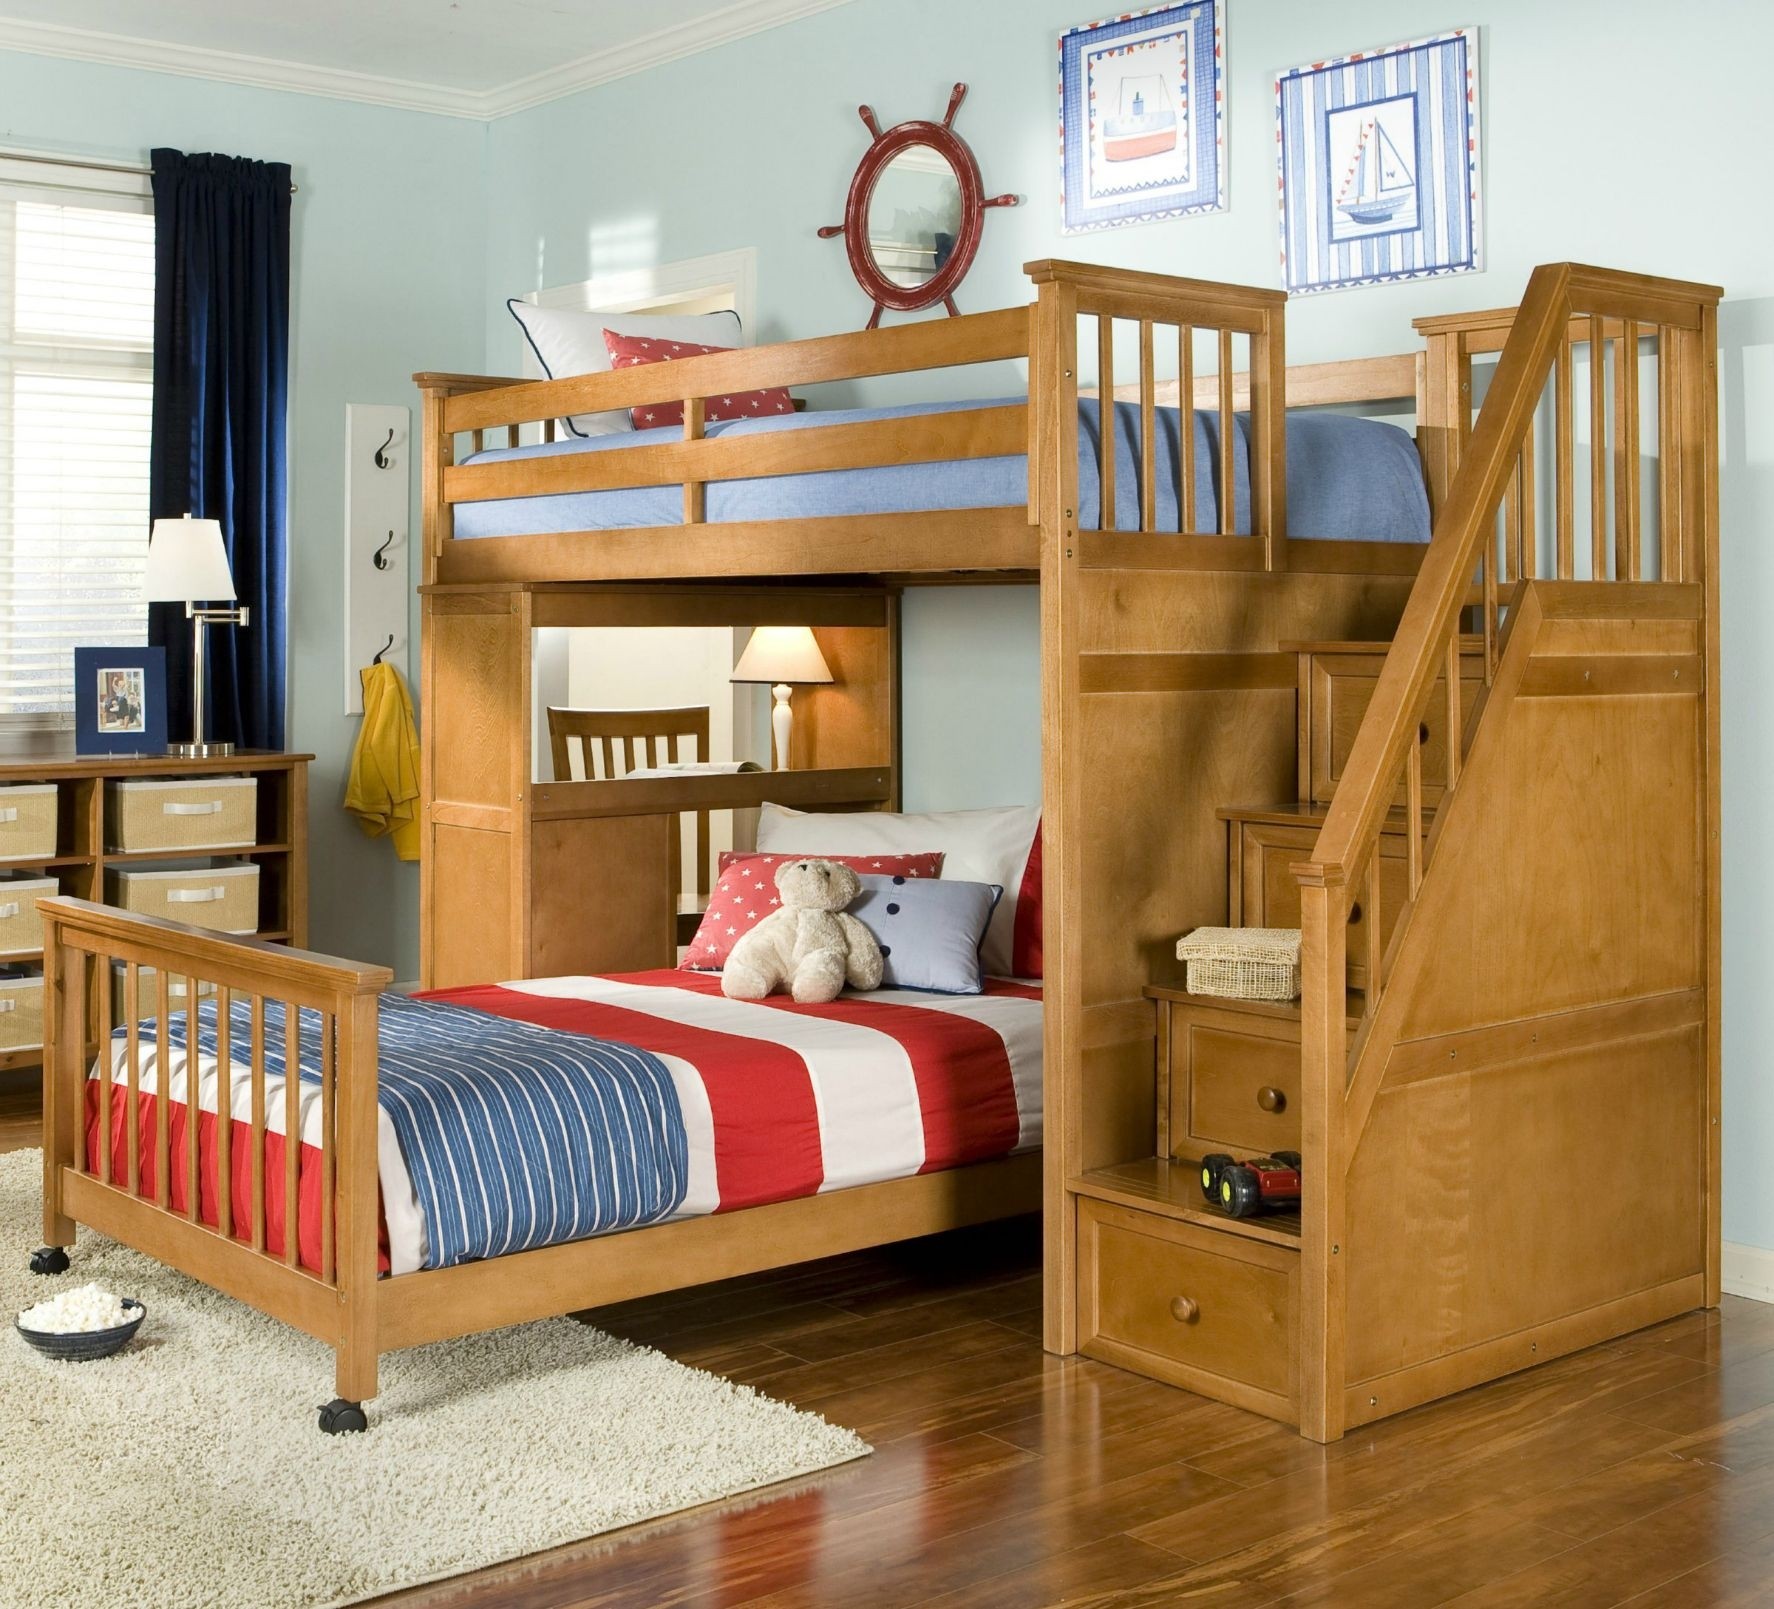 21 top wooden l shaped bunk beds with space saving